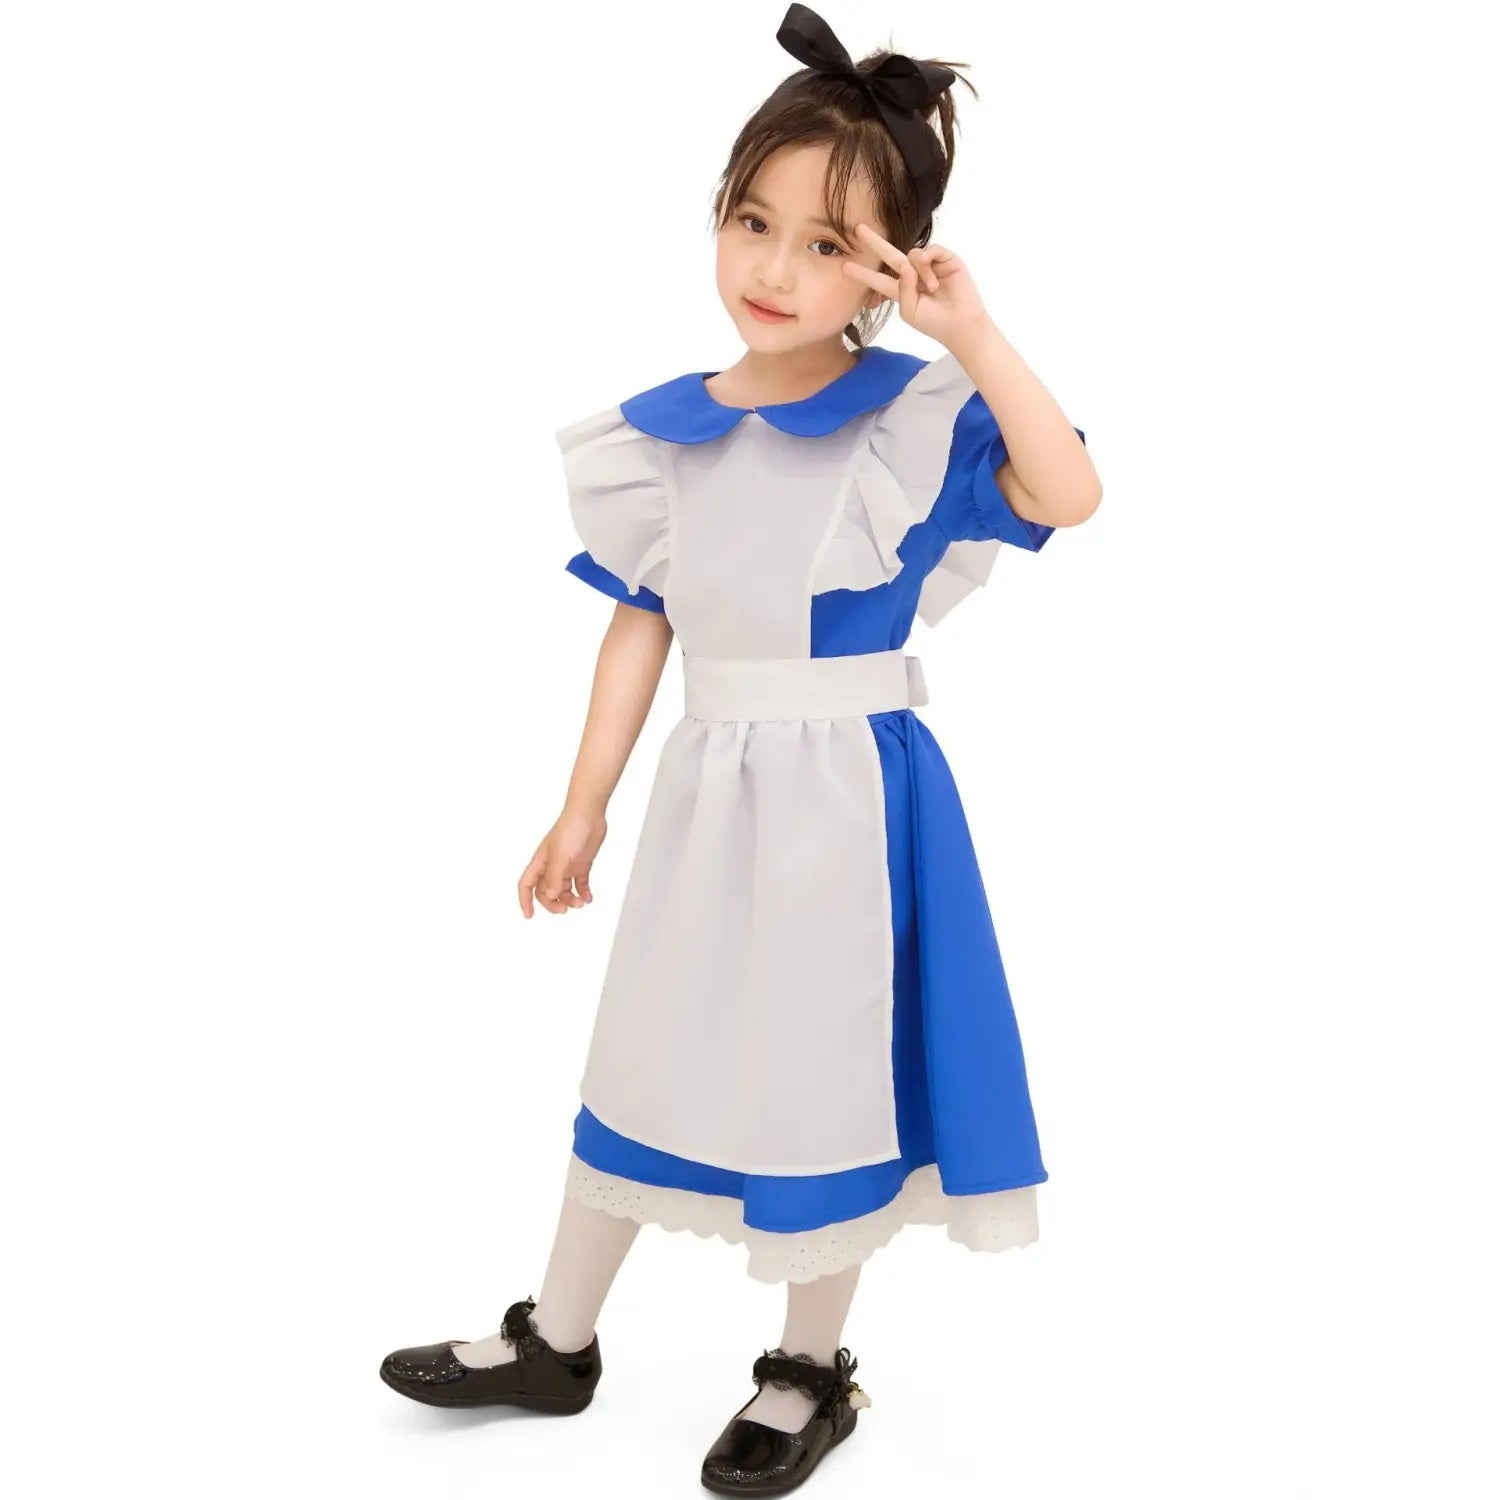 Cute Maid Role Play Costume for Children